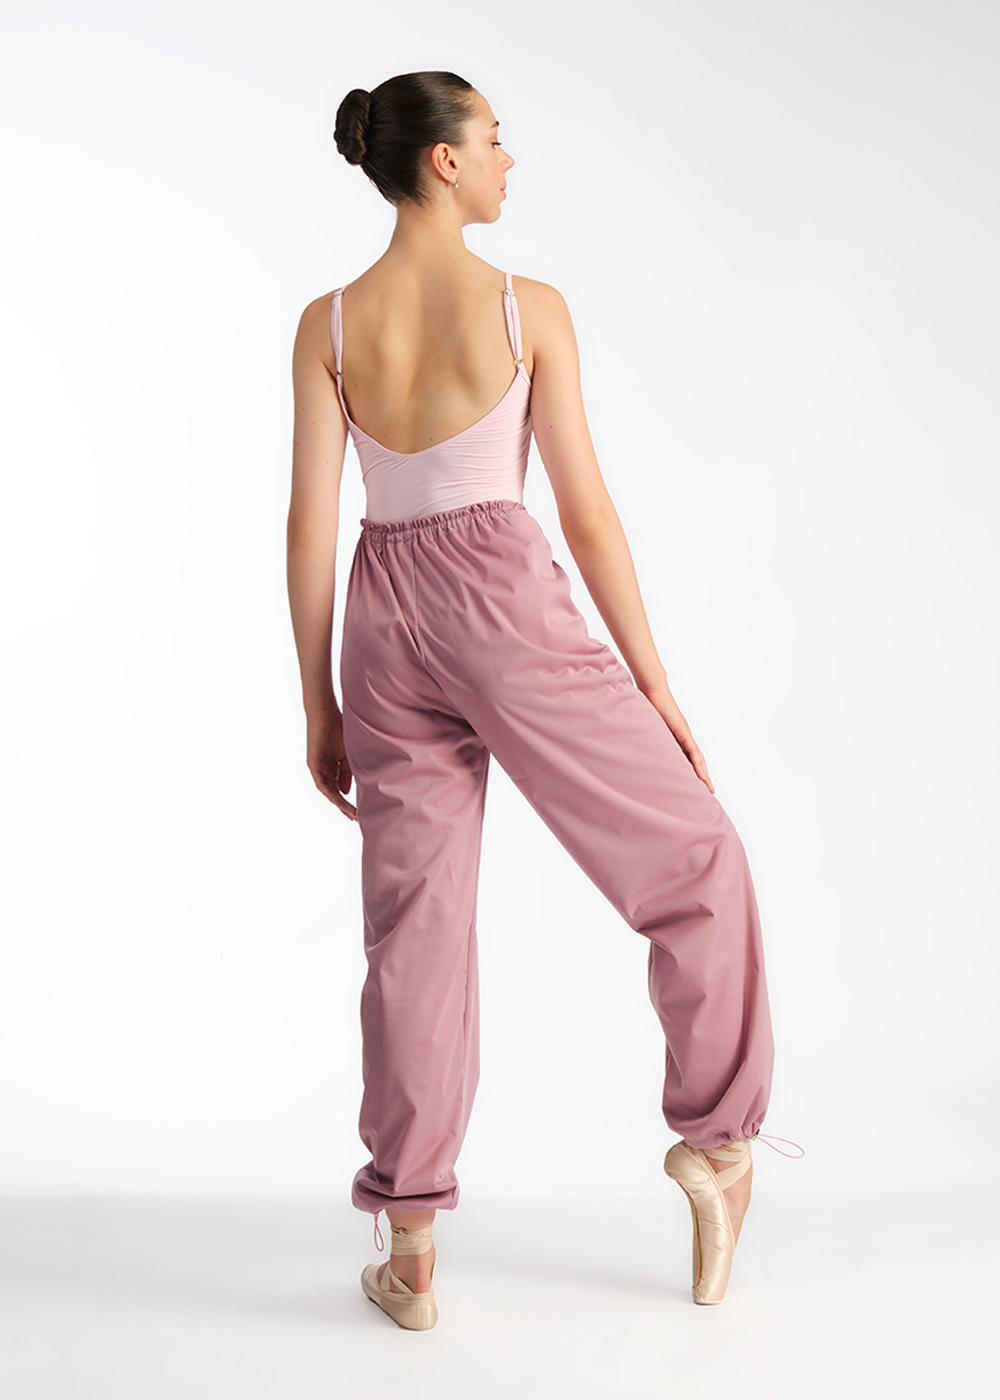 BLISS-1, Lady's warm-up pants (0405N)  Nikolay® - official online shop of  pointe shoes and dance apparel in the USA